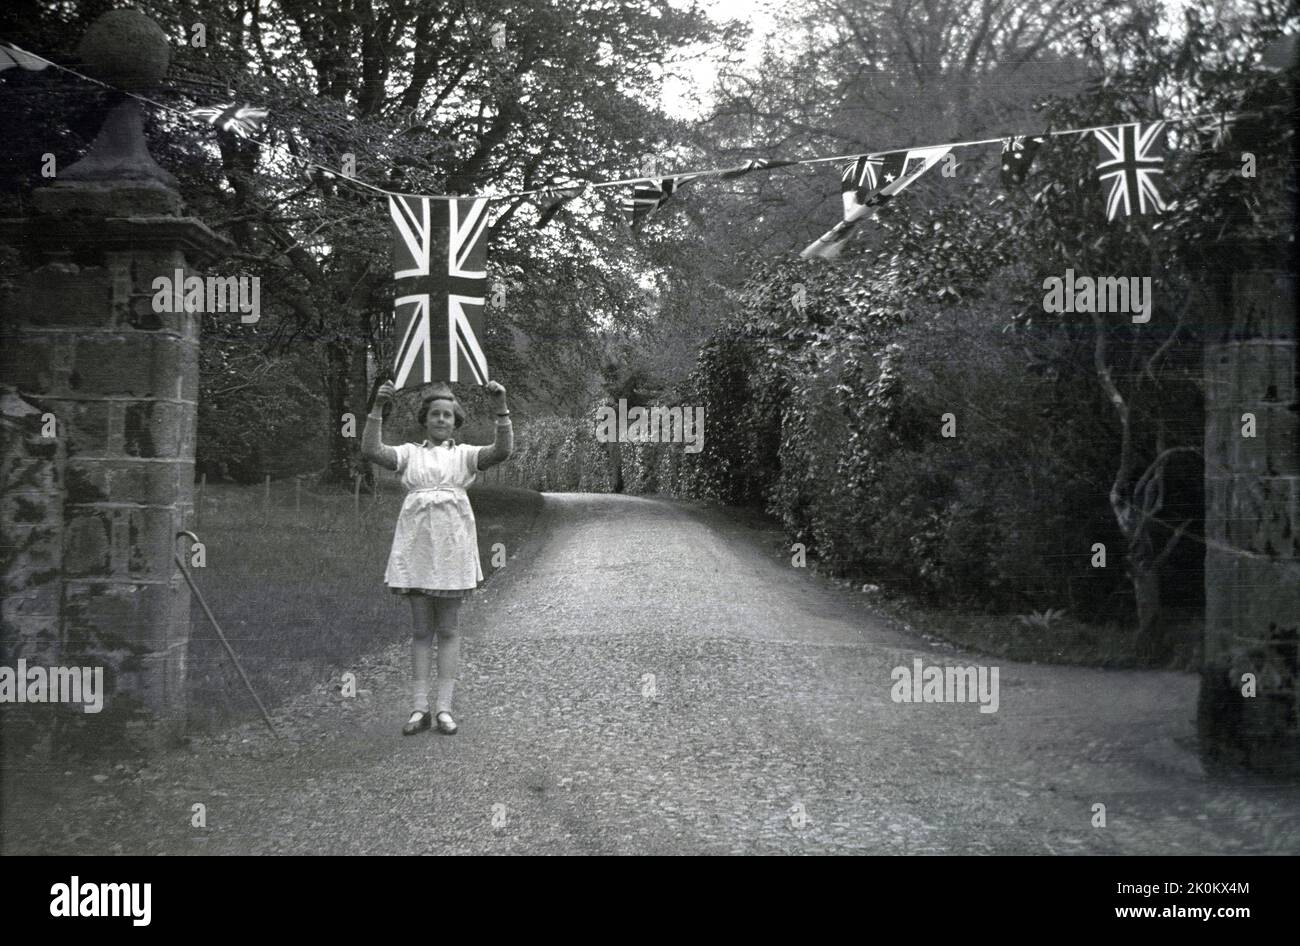 1934, historical, entrance to the country estate of Forcet Hall, young girl holdiing a coronation flag?, England, UK. Stock Photo